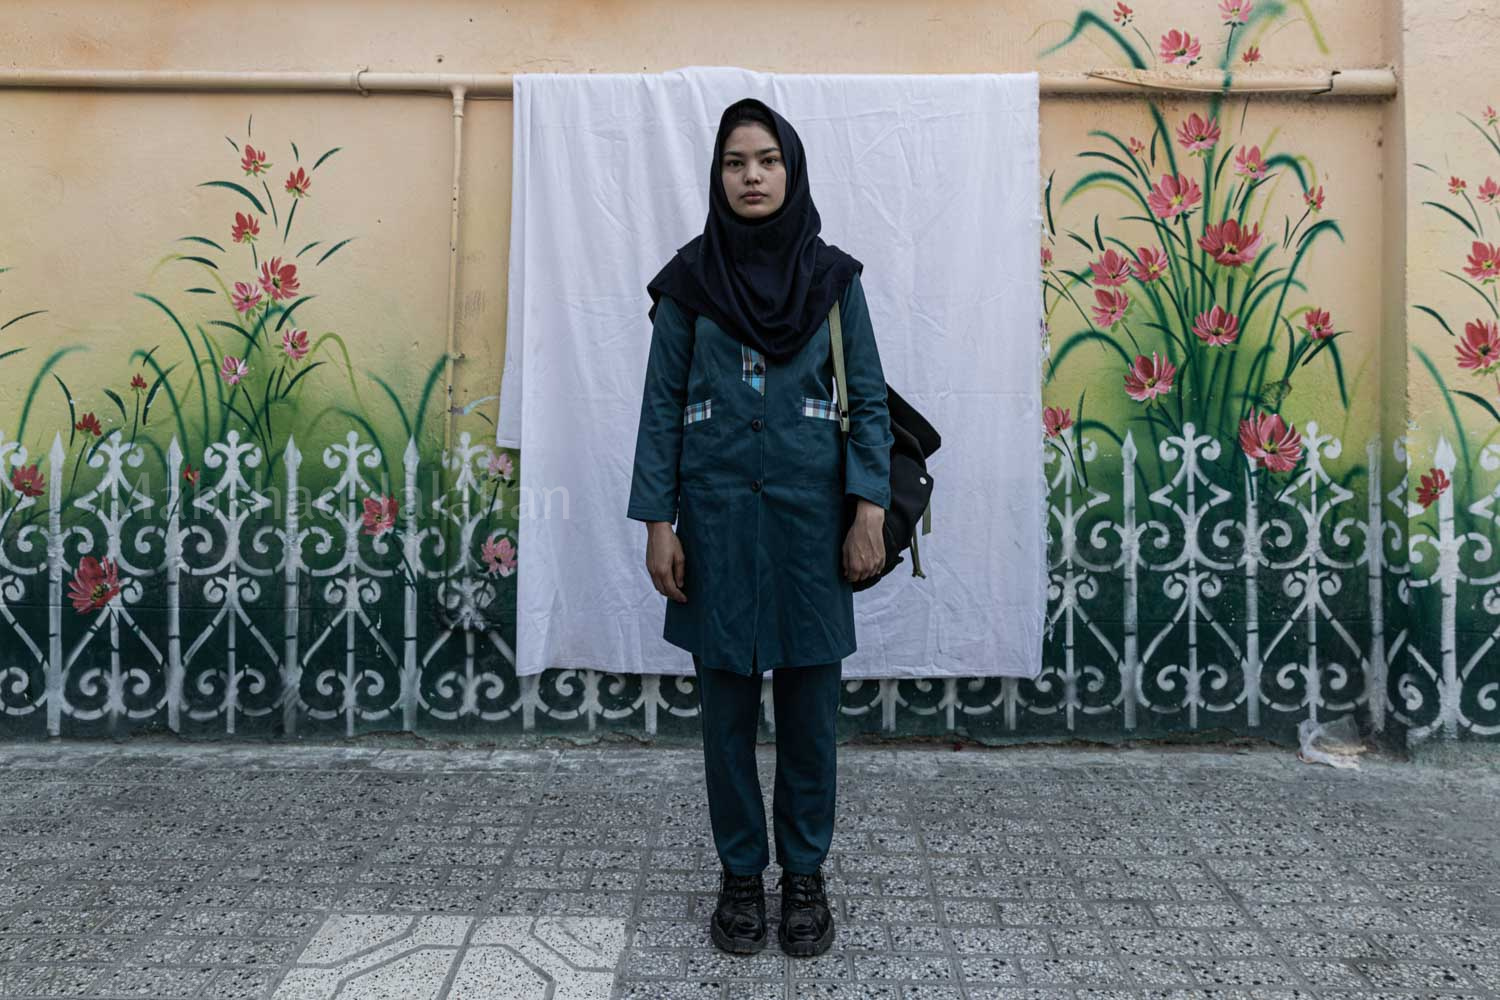 Masoumeh Moradi 15-year-old moved 10 months ago from Balkh, Afghanistan. She studied at grade 8 however she is going to study at grade 6.